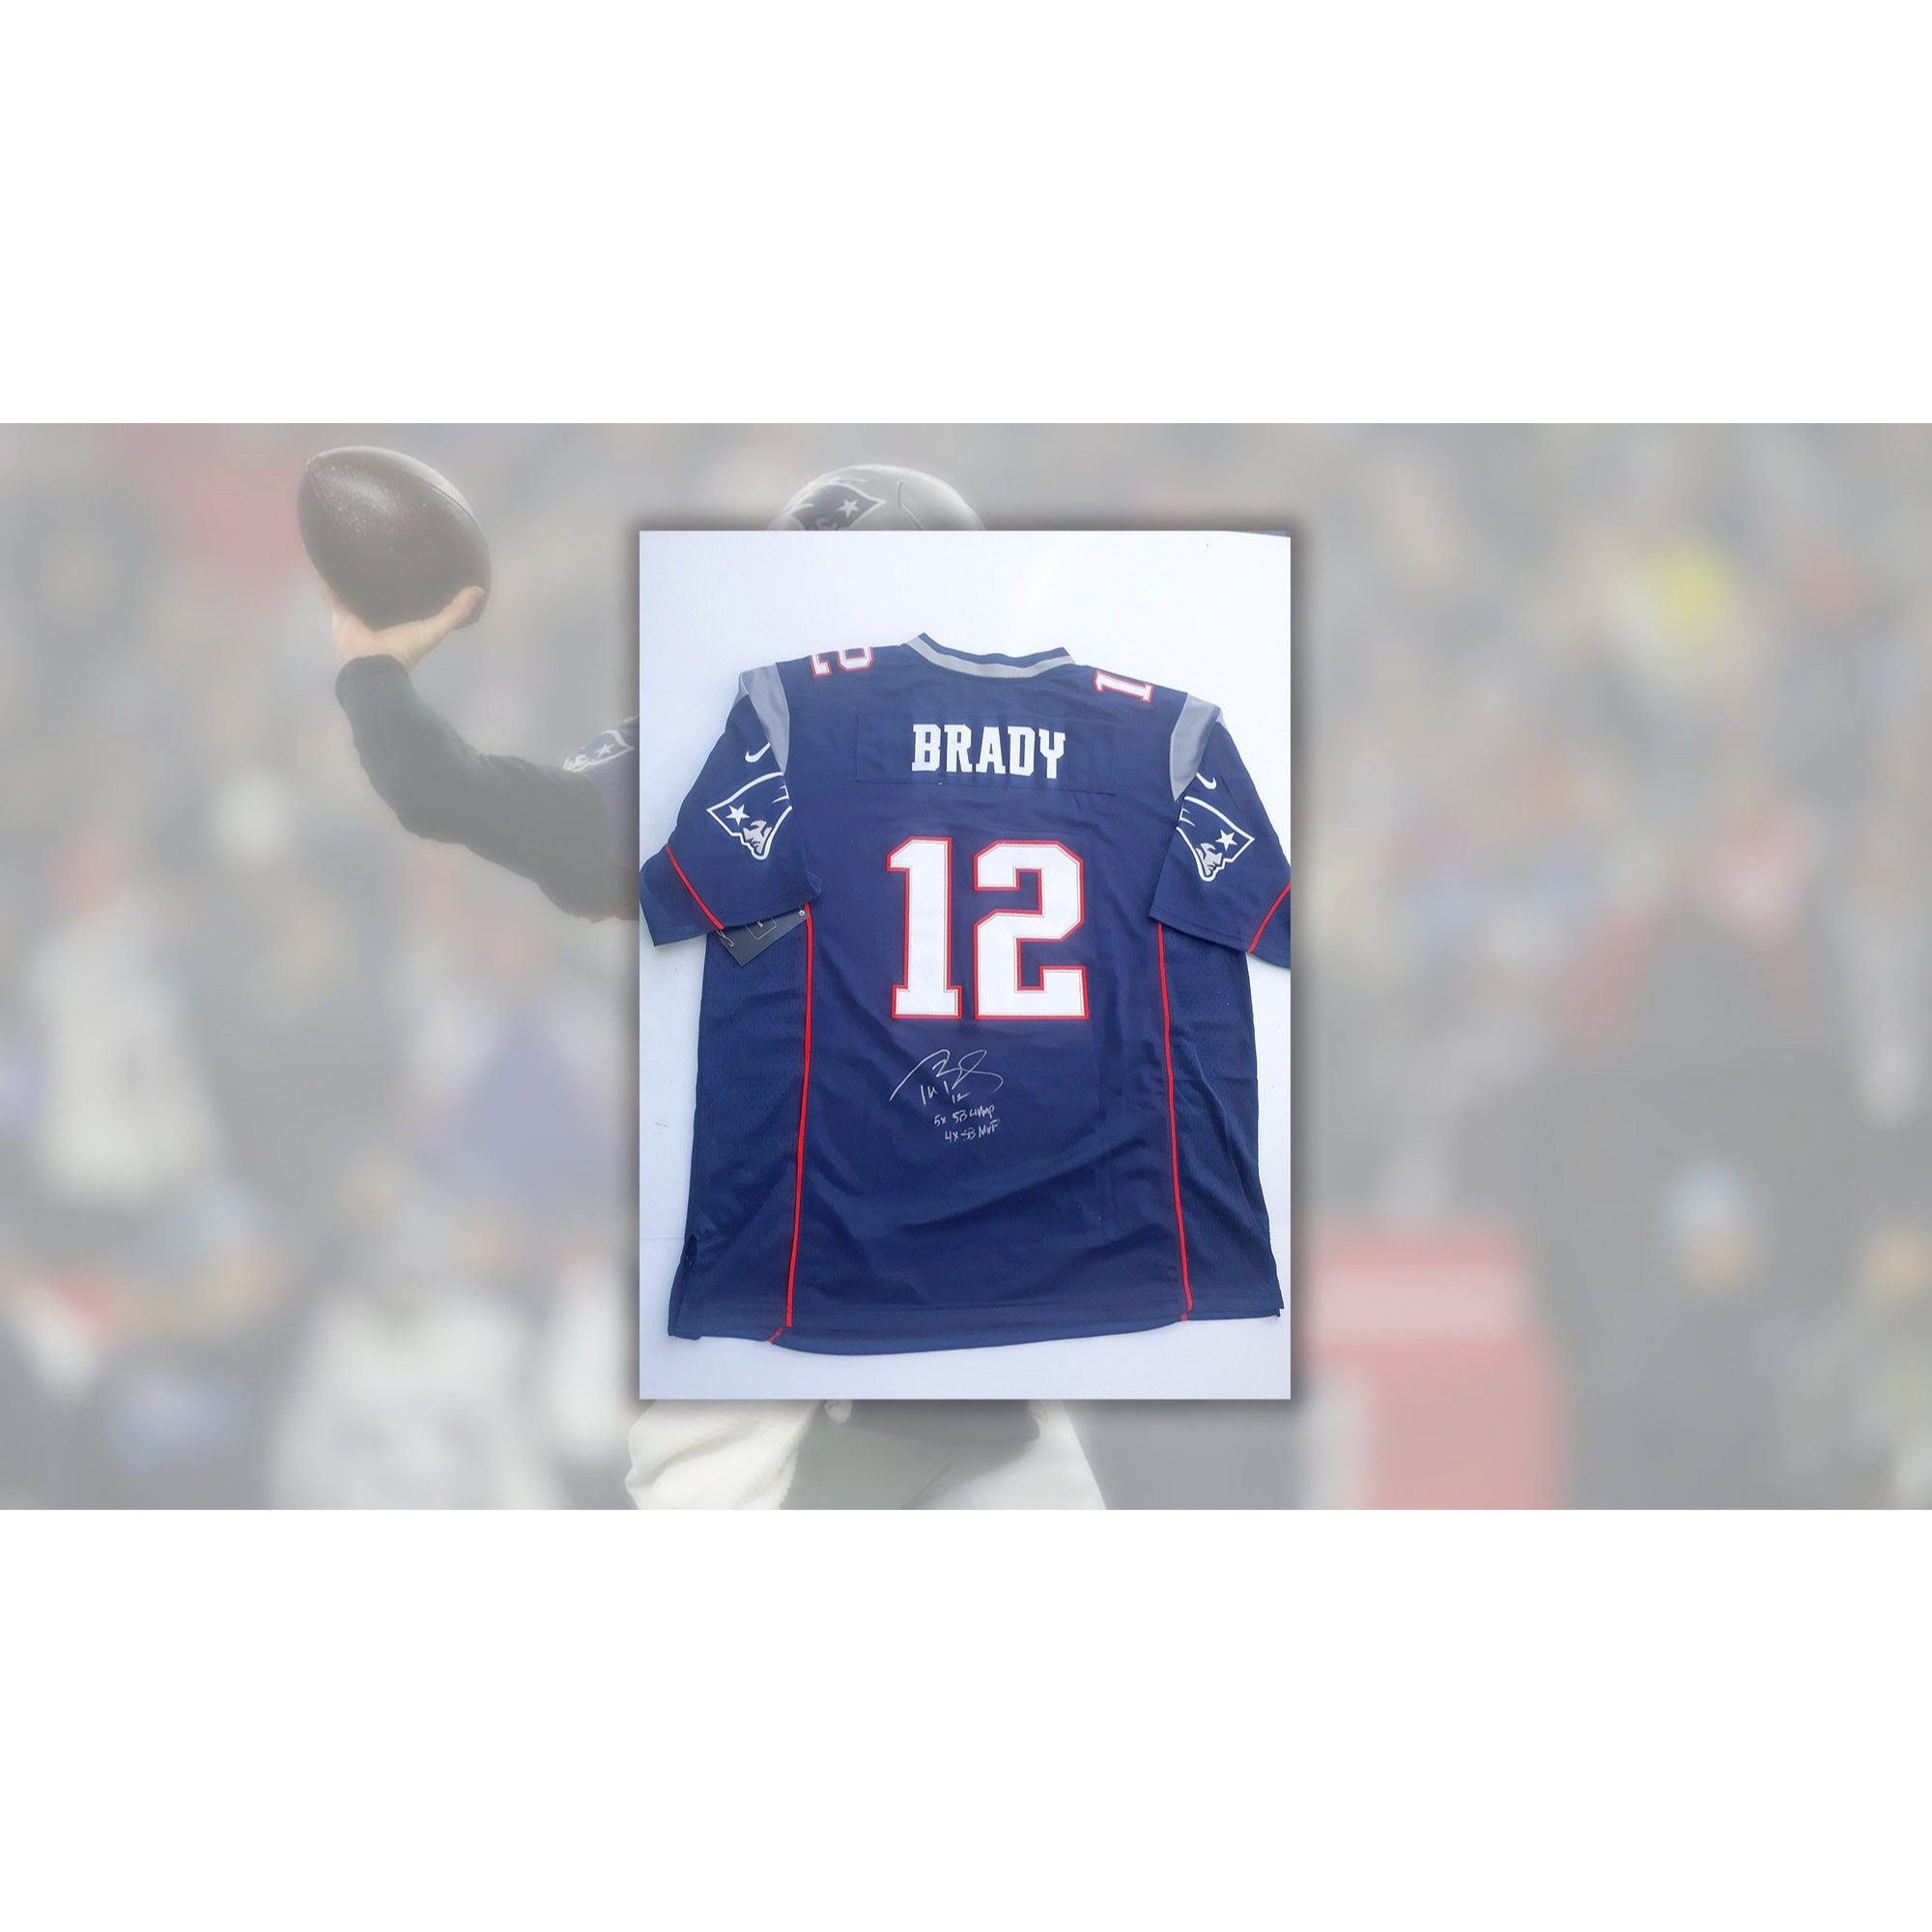 Tom Brady New England Patriots size large authentic jersey signed and inscribed with proof